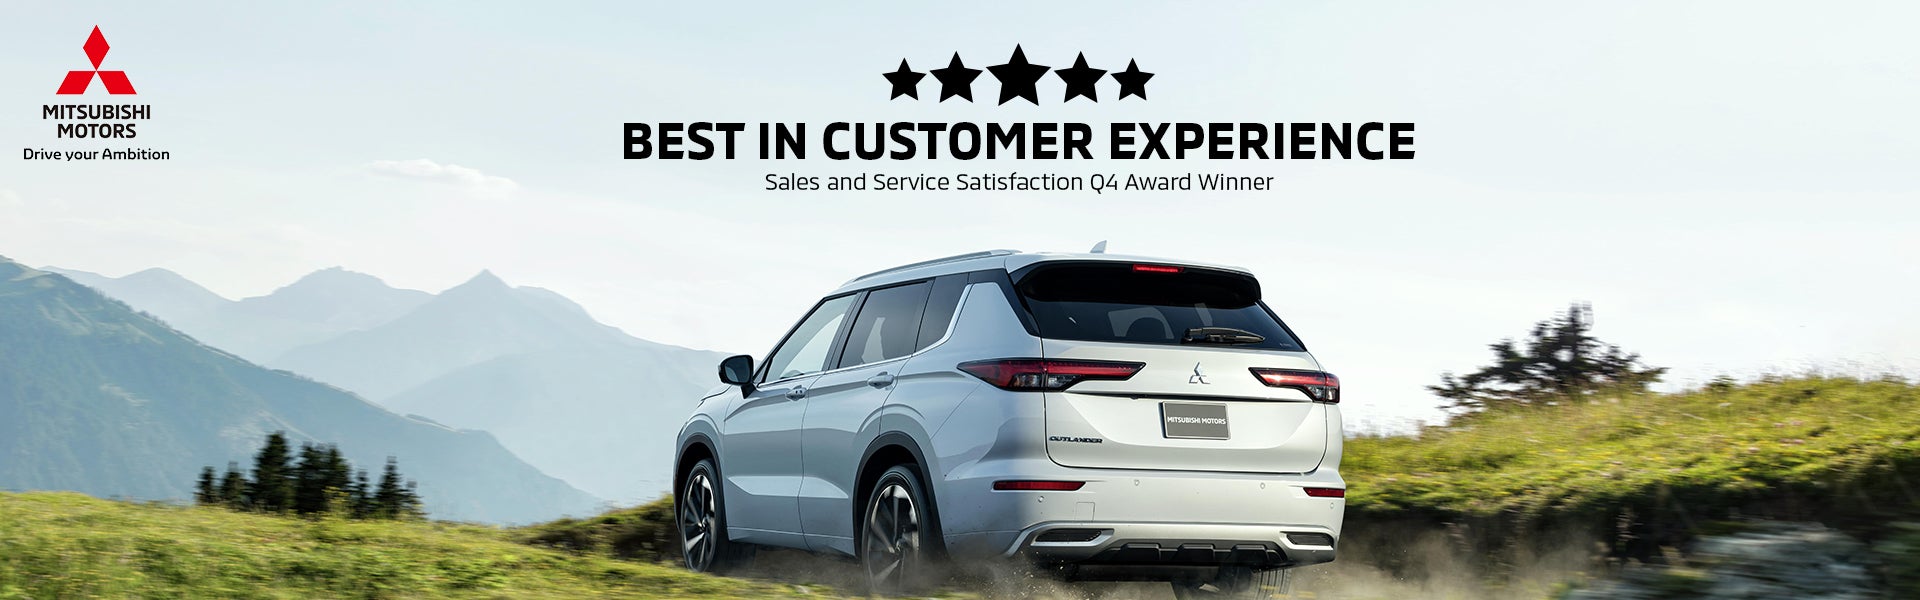 best in customer experience